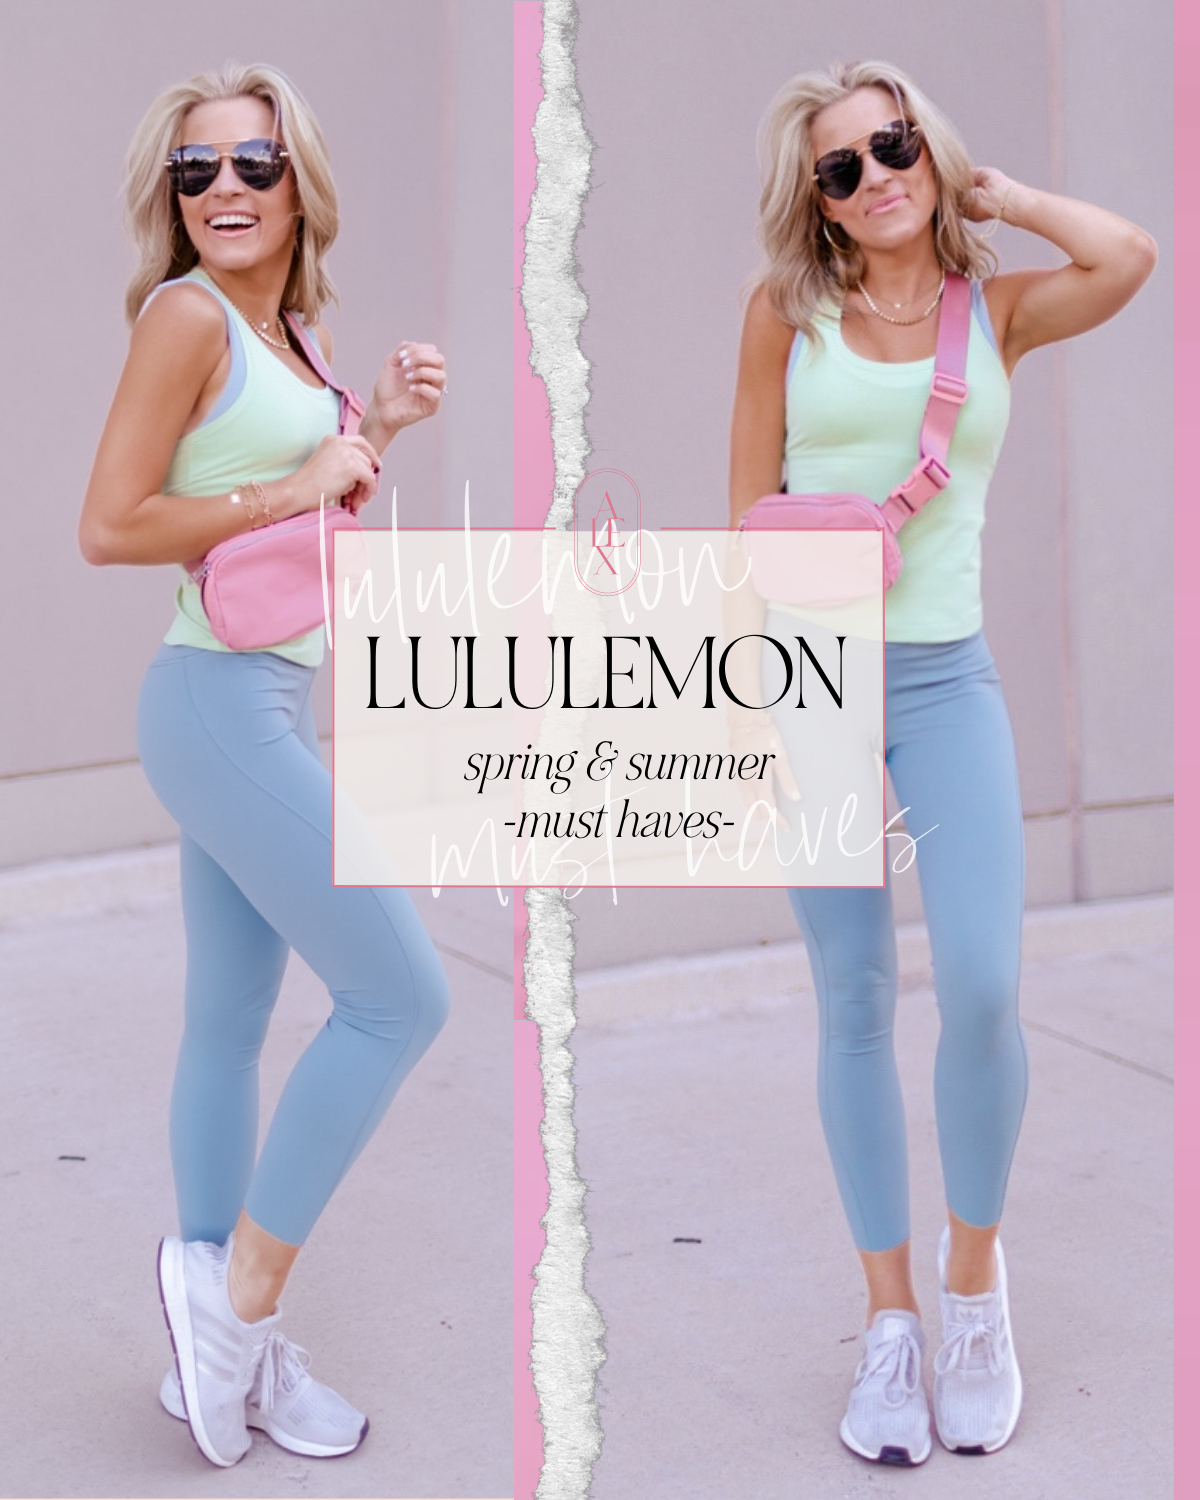 lululemon New Arrivals for Spring + Summer - One Love by Alex